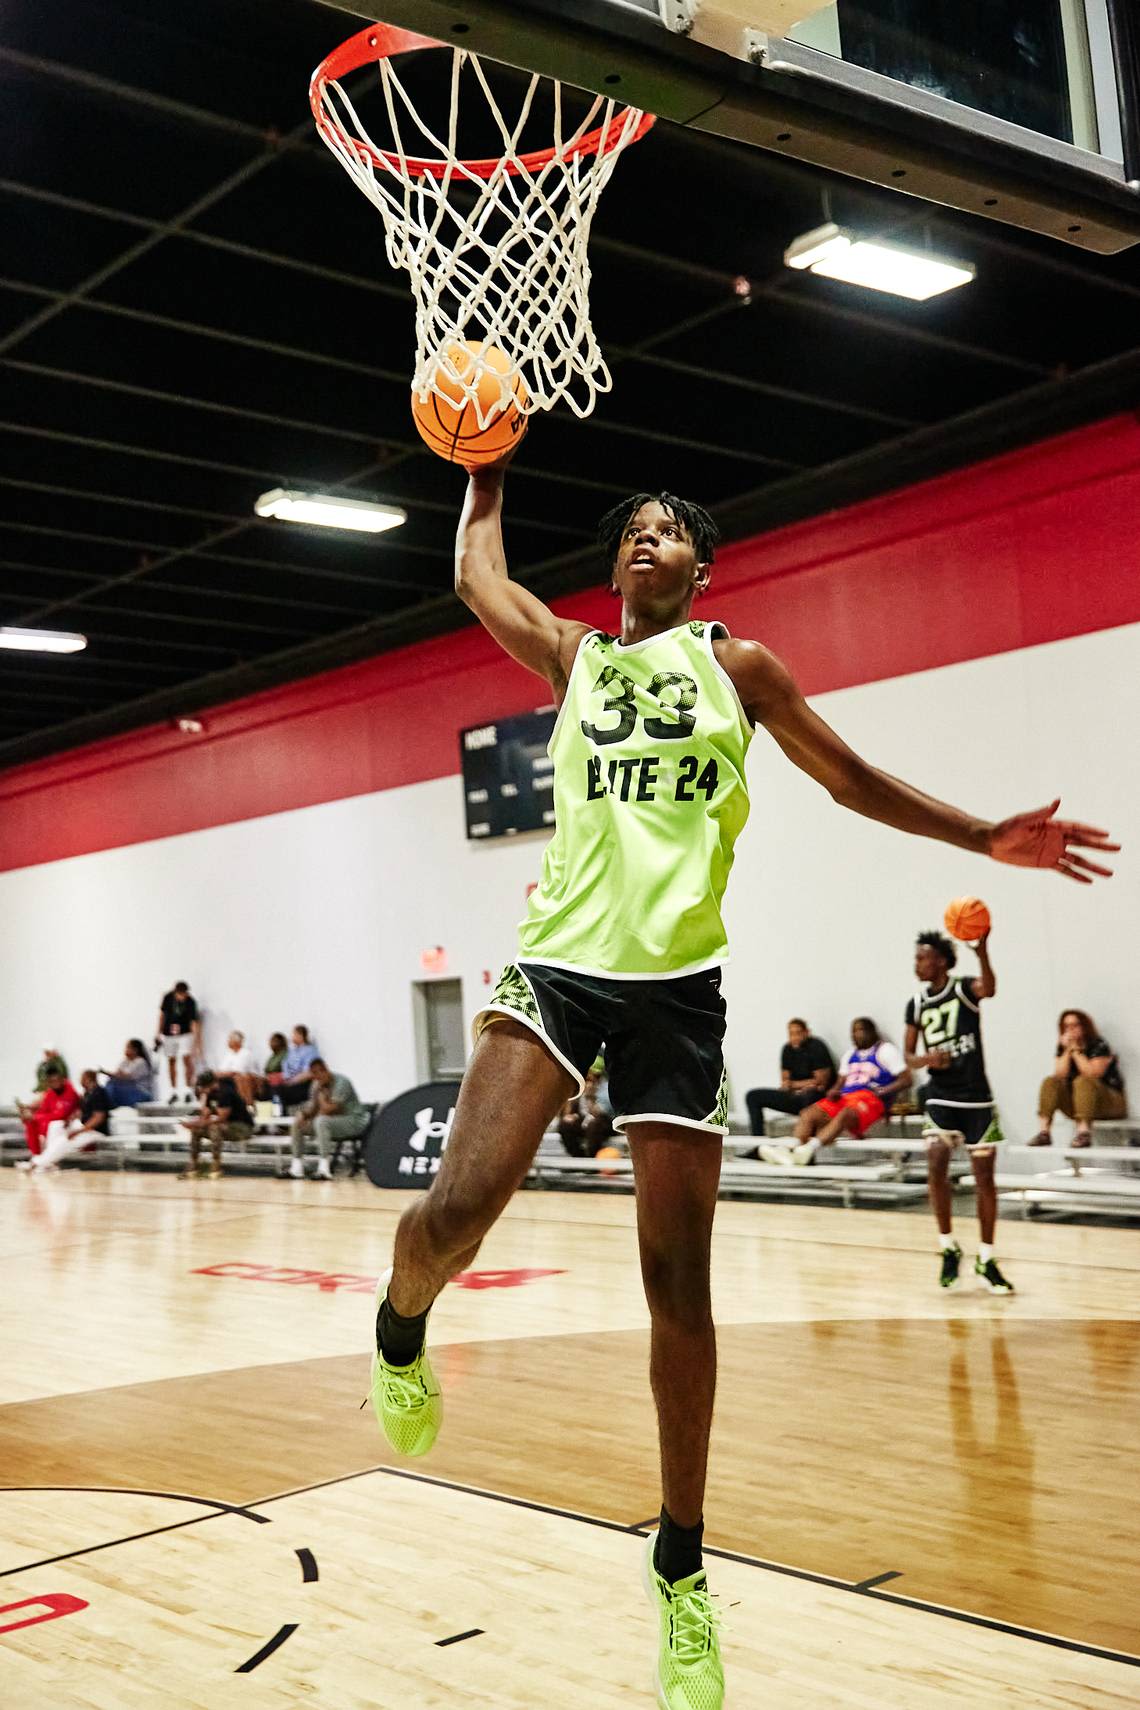 He visited UK for Big Blue Madness last year. Now, other SEC schools lead his recruitment.